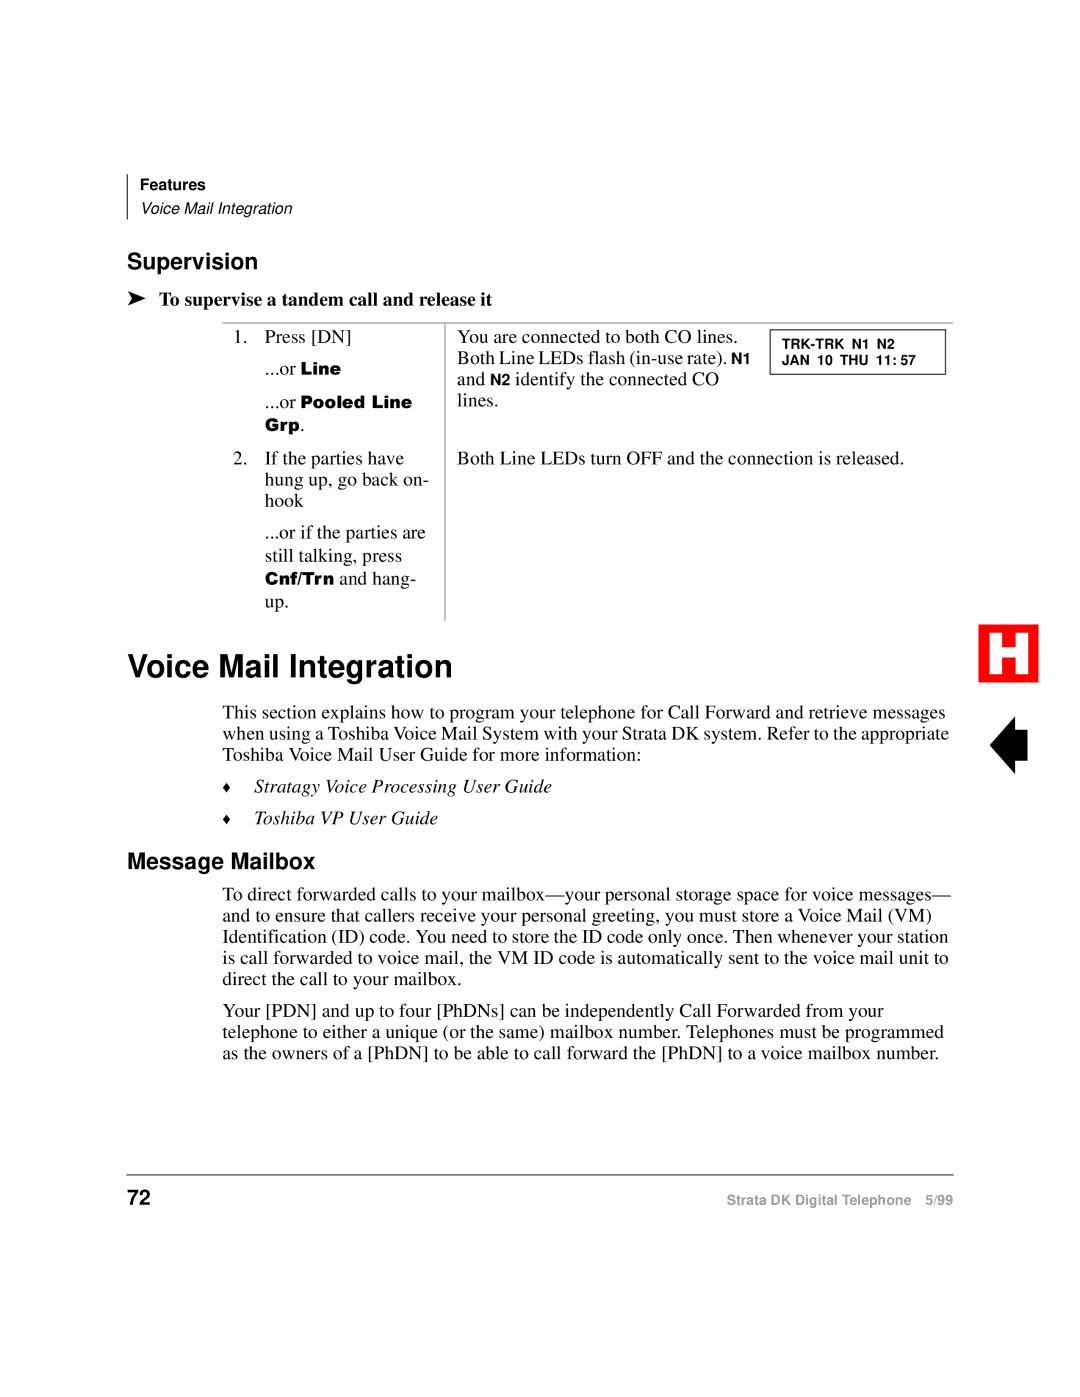 Toshiba Digital Telephone Voice Mail Integration, Supervision, Message Mailbox, To supervise a tandem call and release it 